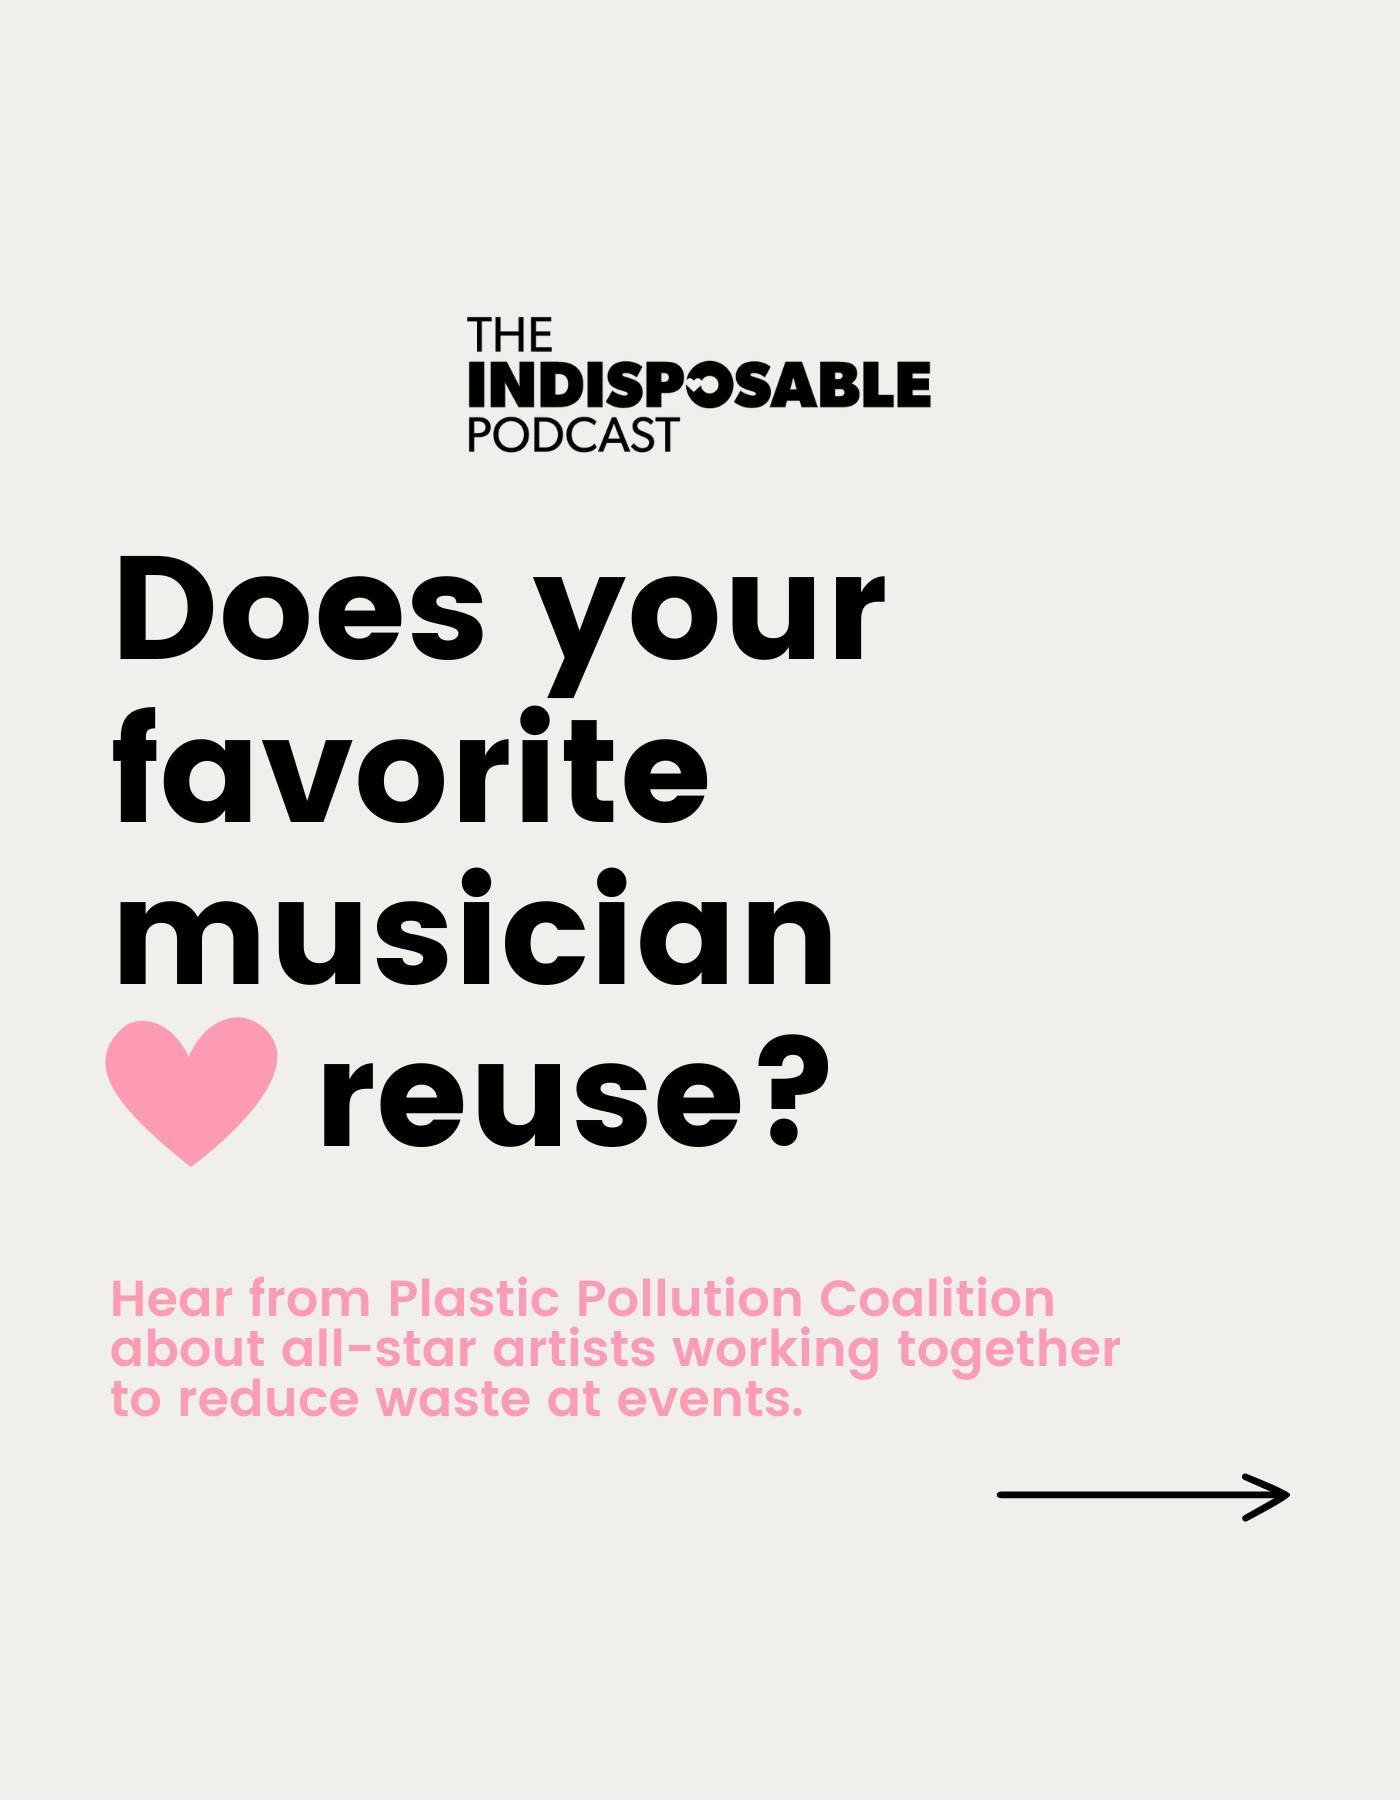 Does your favorite musician 💓 reuse? 

Dianna Cohen and Annie Rothschild Farman of Plastic Pollution Coalition spoke about implementing reuse systems at music festivals on #TheIndisposablePodcast✨

From Hollywood sets to festival stages, this conver